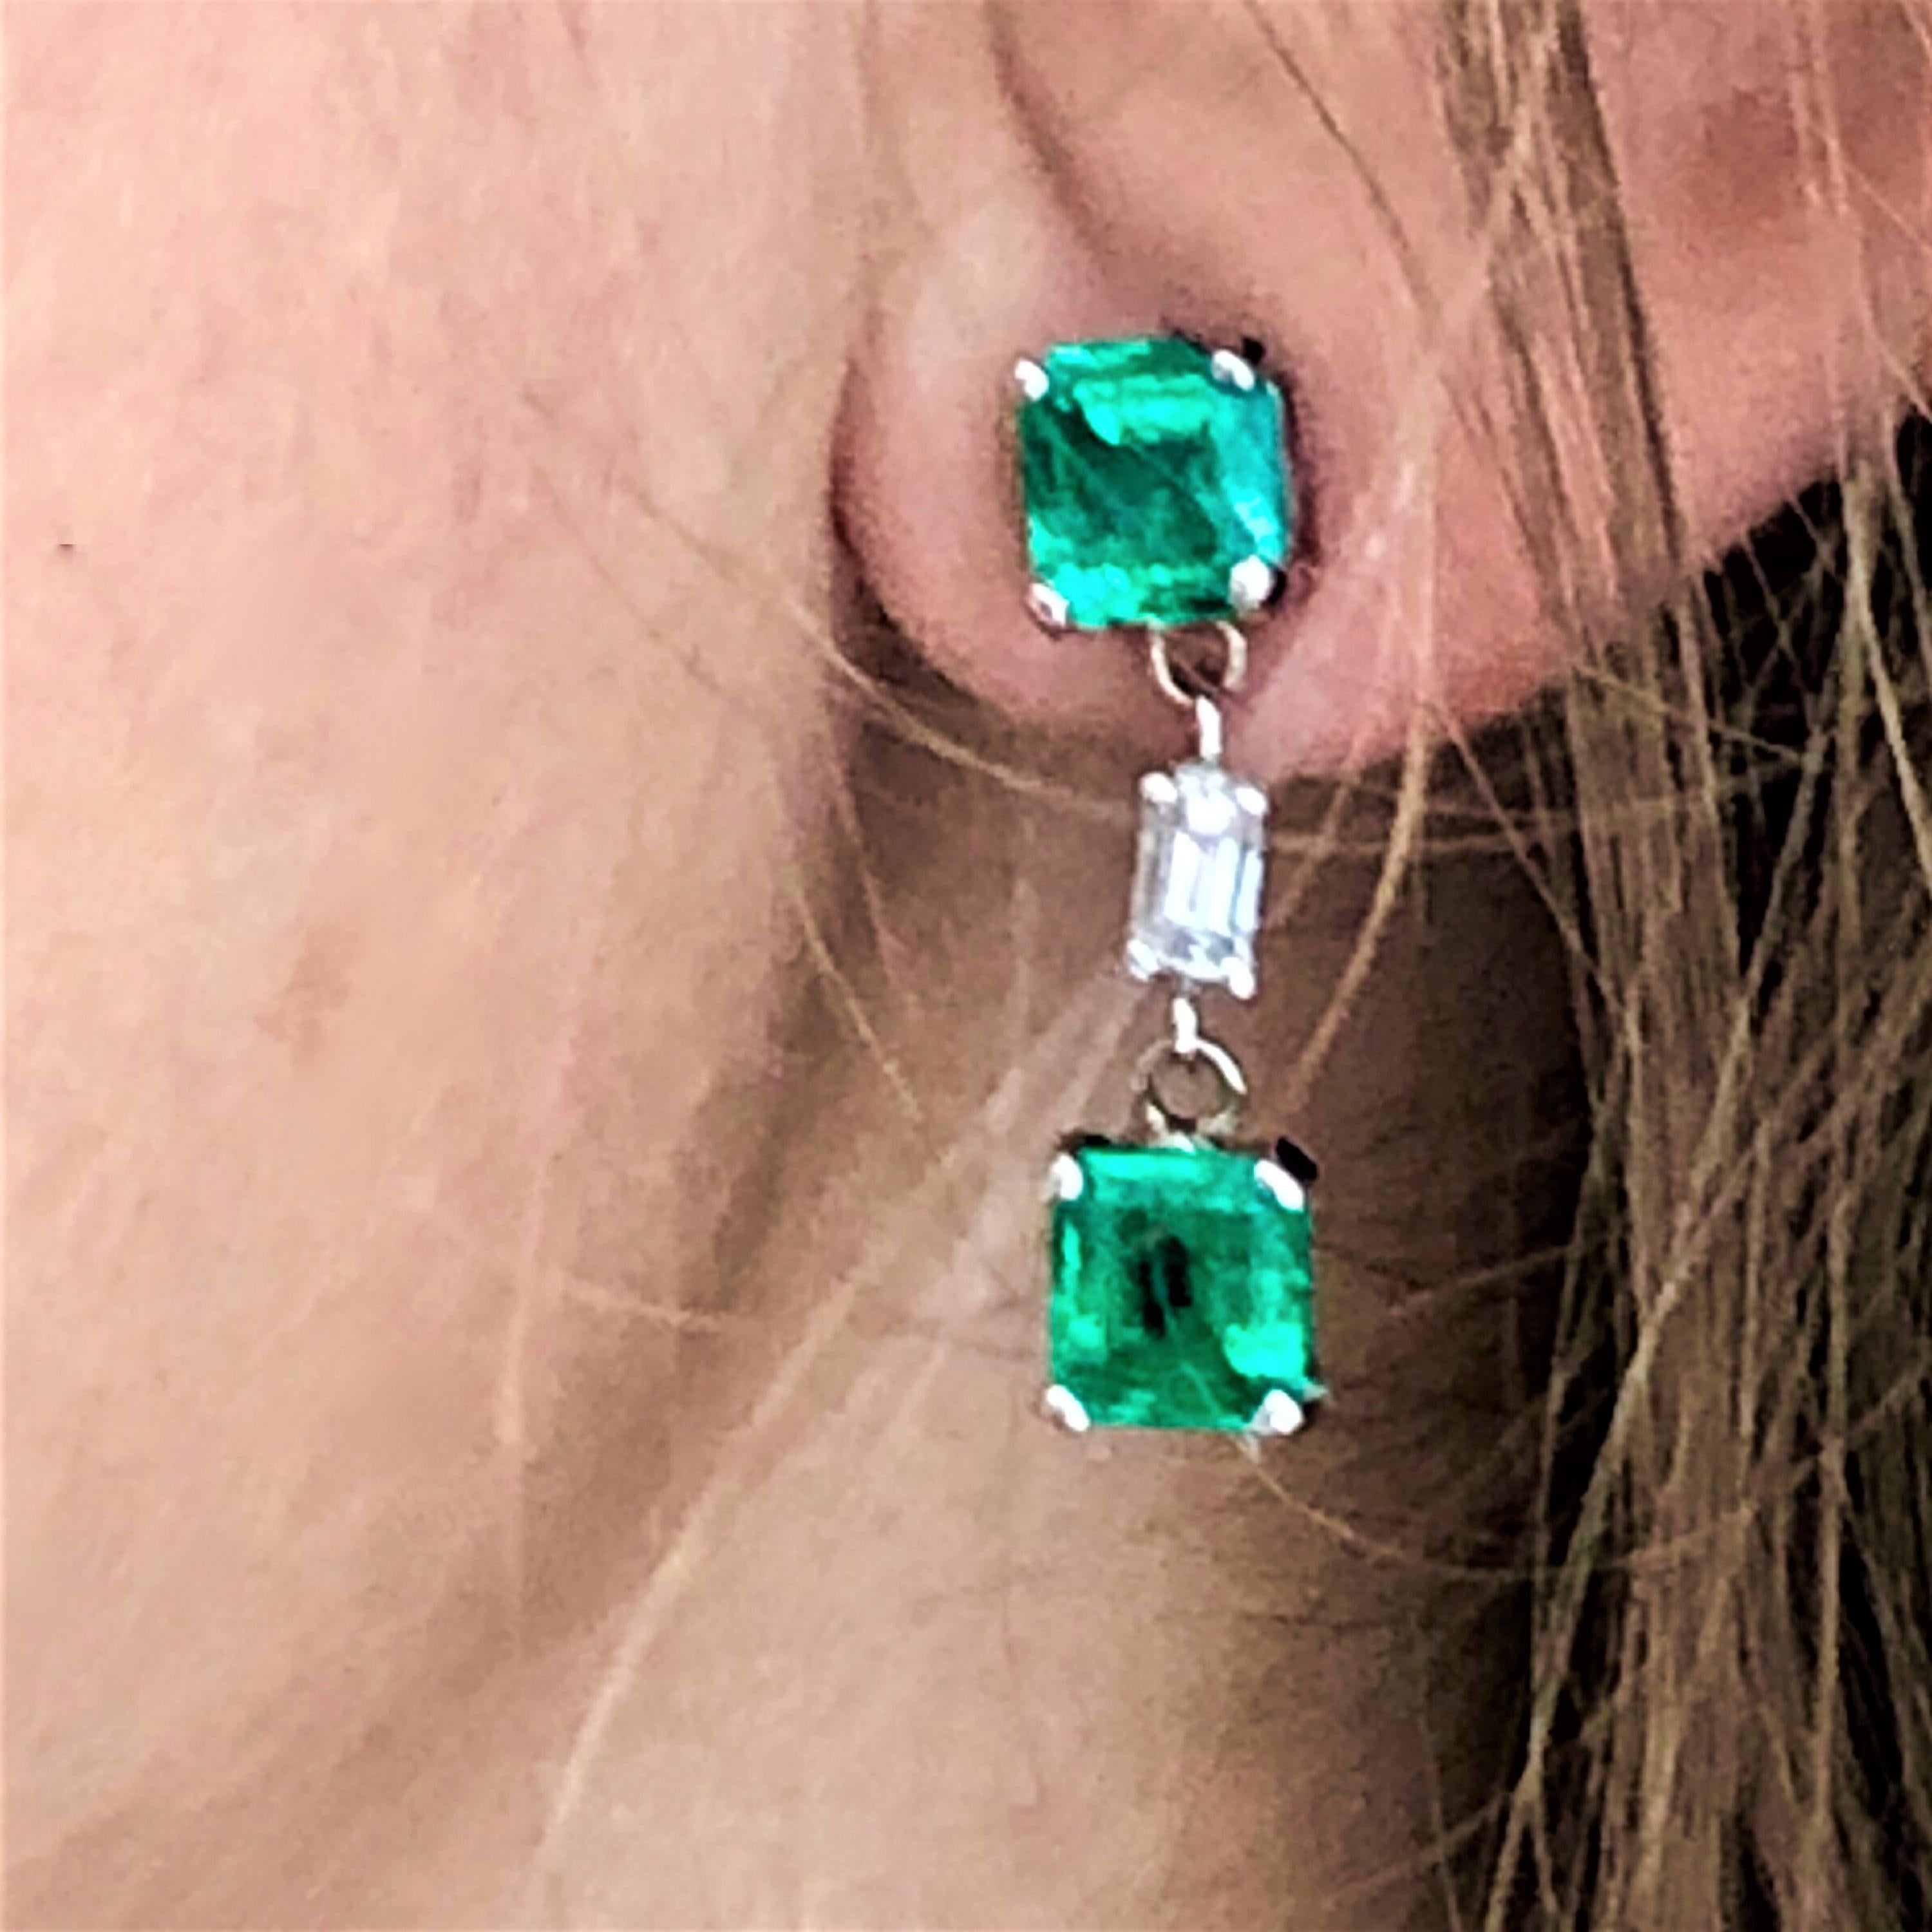 Fourteen karat white gold diamond and emerald drop earrings 
Earrings are one inch long
Two emerald cut diamond weighing 0.30 carat
Four emerald cut emeralds weighing 3.35 carat 
Diamond quality G VS
Emerald quality bright and vivid green
New